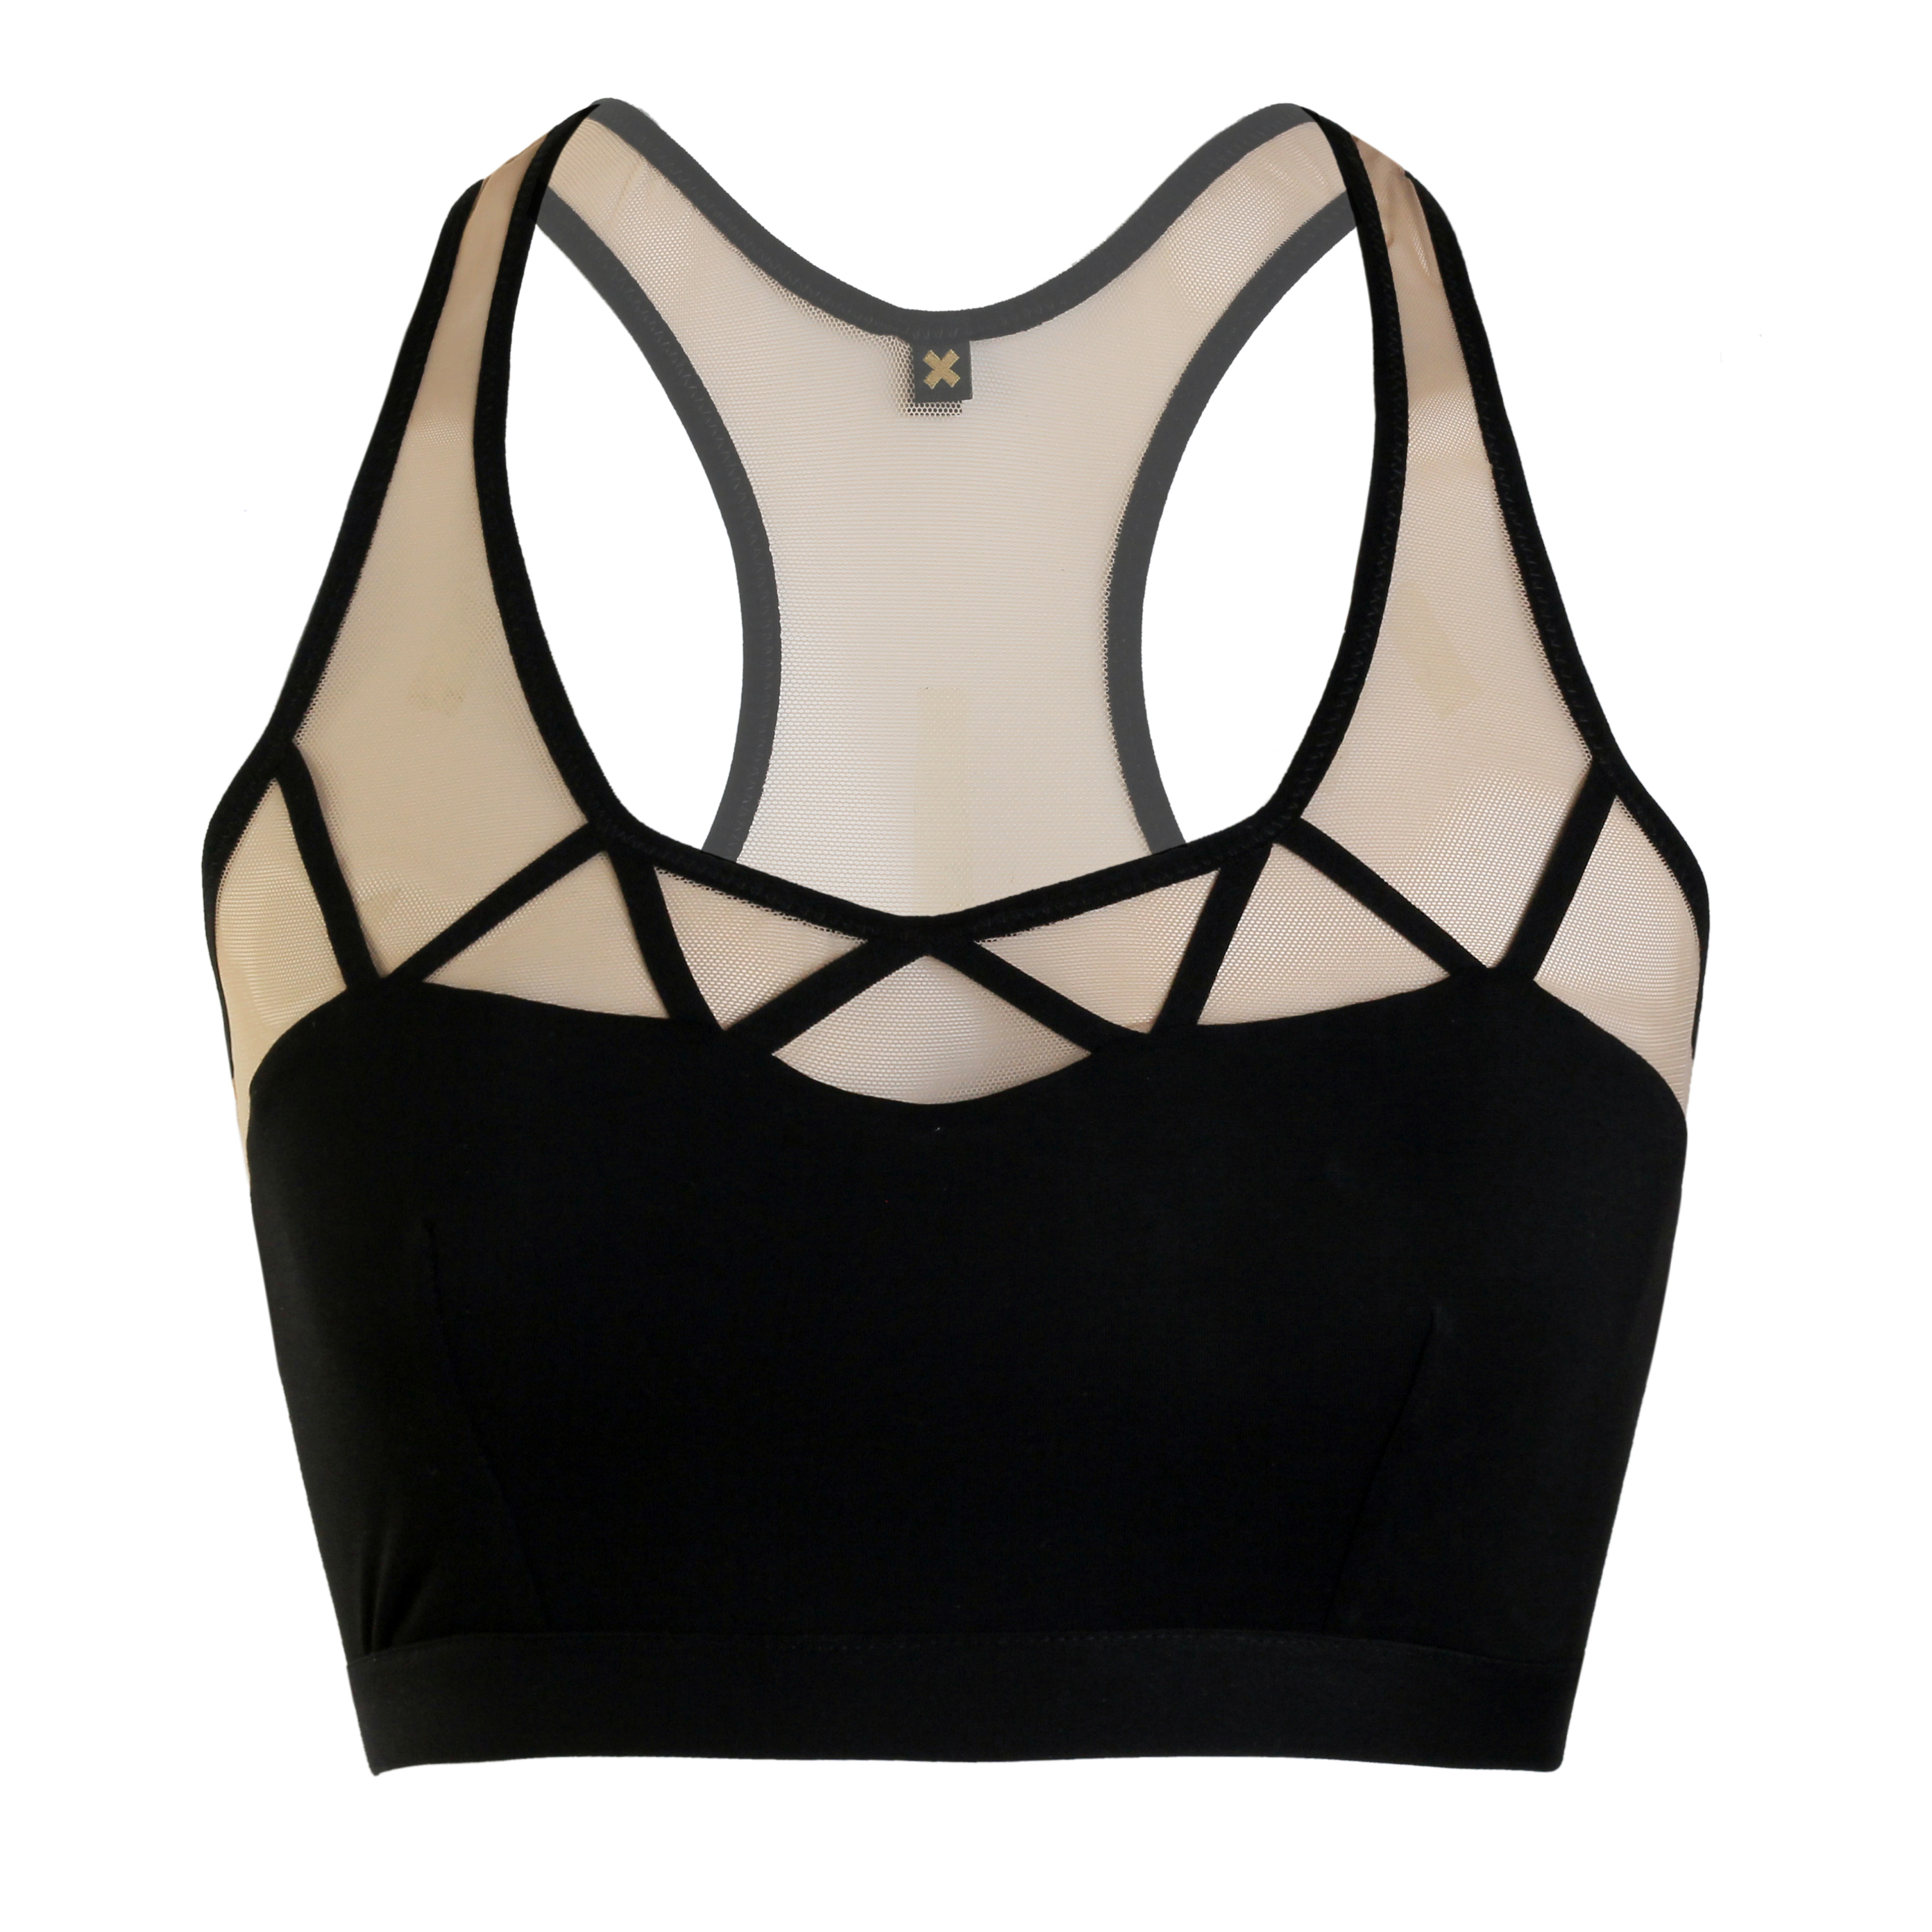 Sporty Racer Back Crop Top From Organic Jersey by Flash